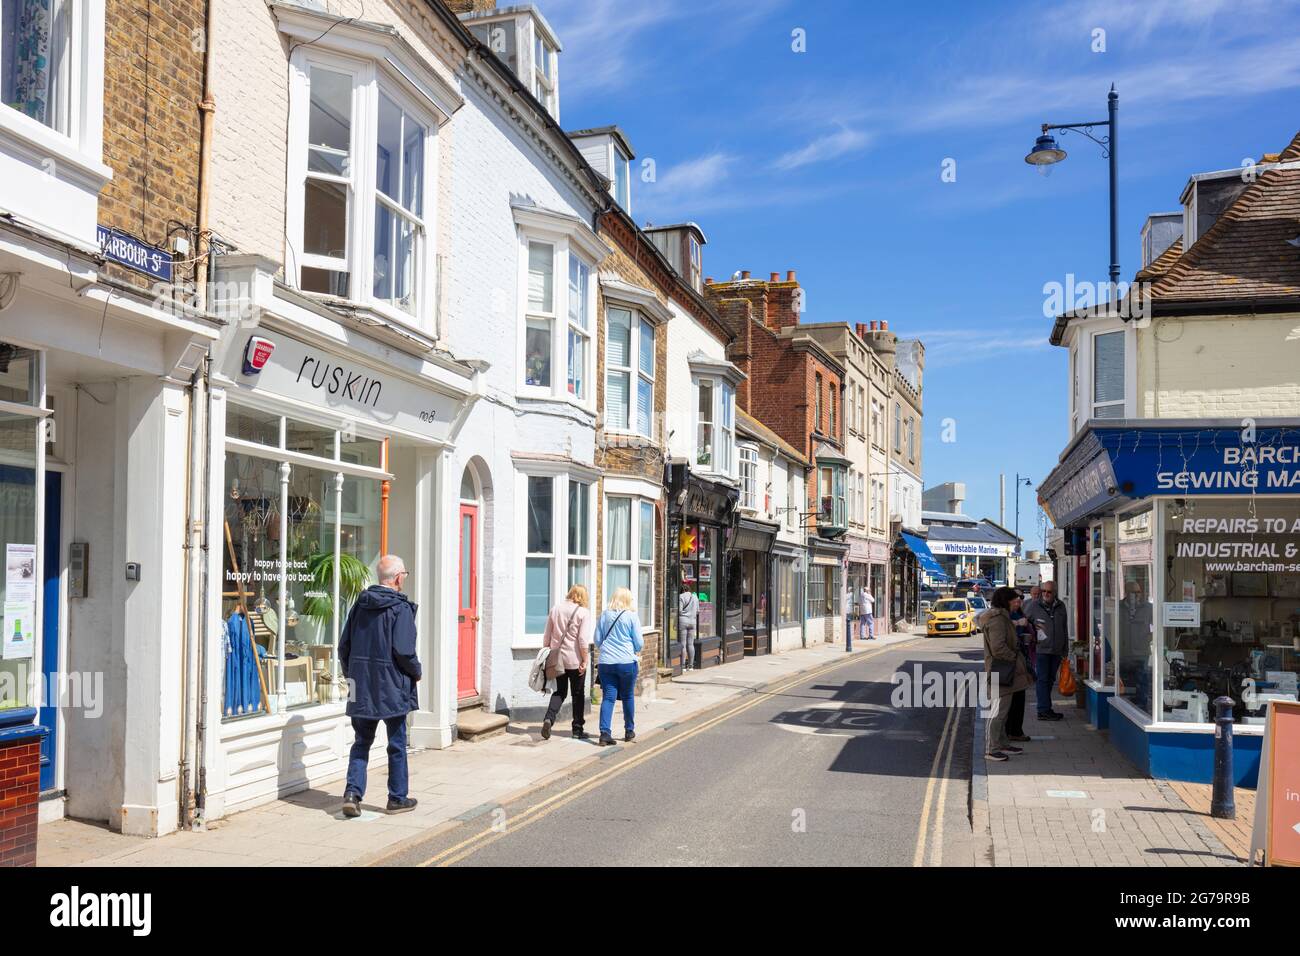 Brightly coloured Shops on Harbour Street town centre Whitstable Kent England UK GB Europe Stock Photo